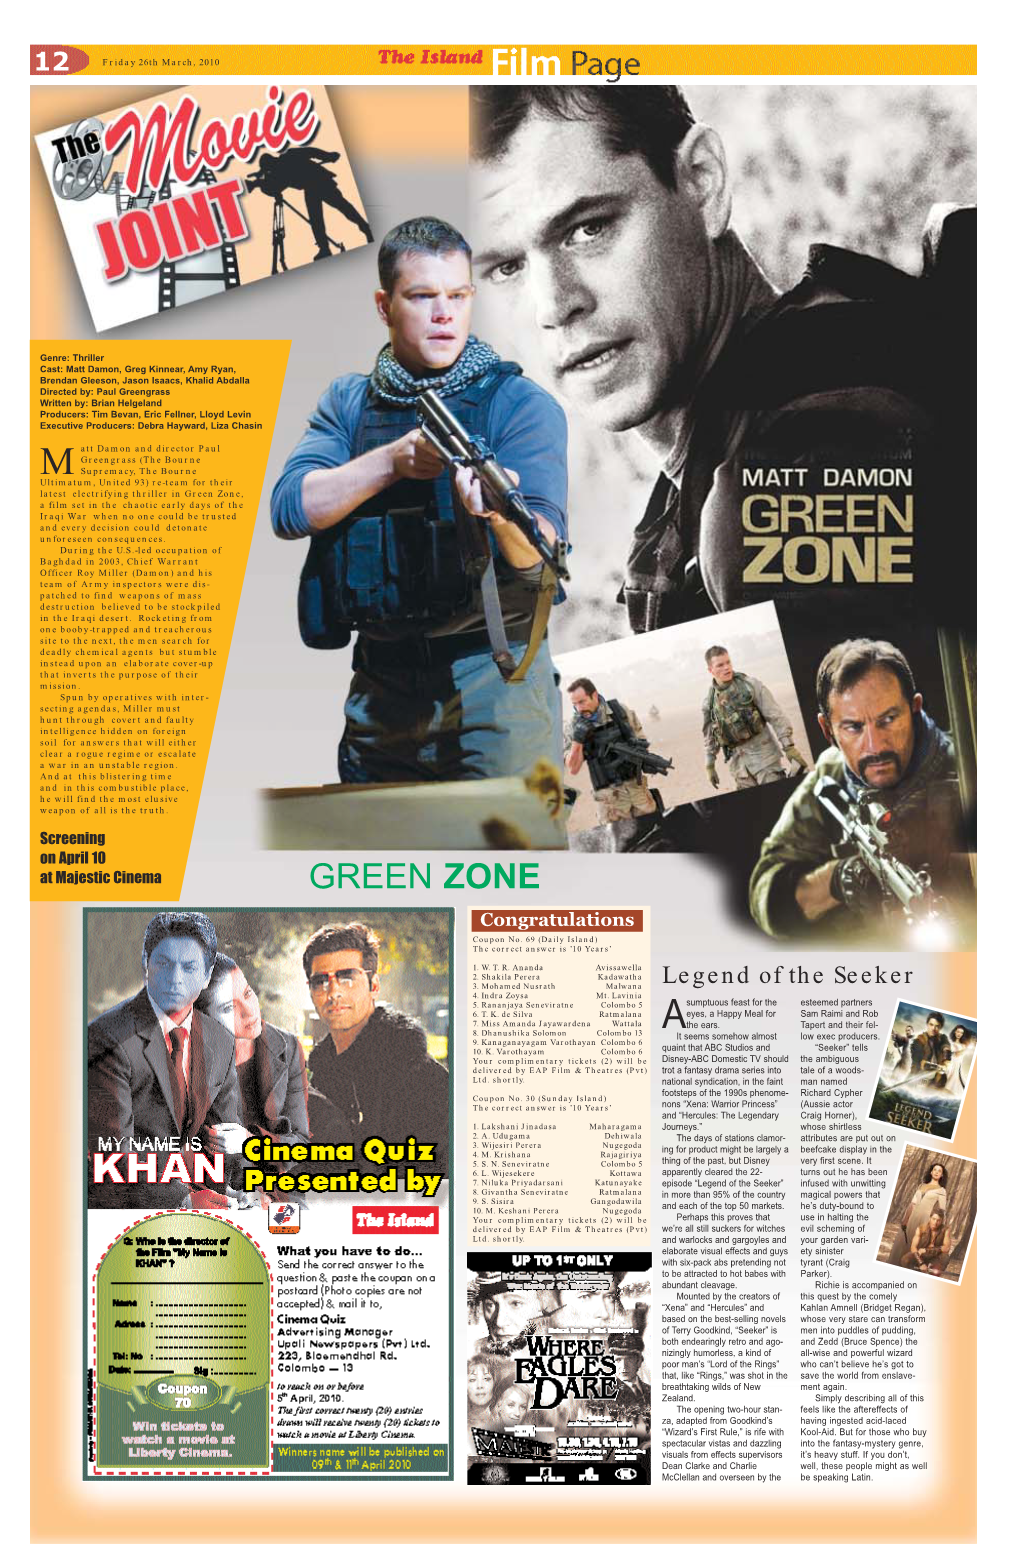 Green Zone, a Film Set in the Chaotic Early Days of the Iraqi War When No One Could Be Trusted and Every Decision Could Detonate Unforeseen Consequences